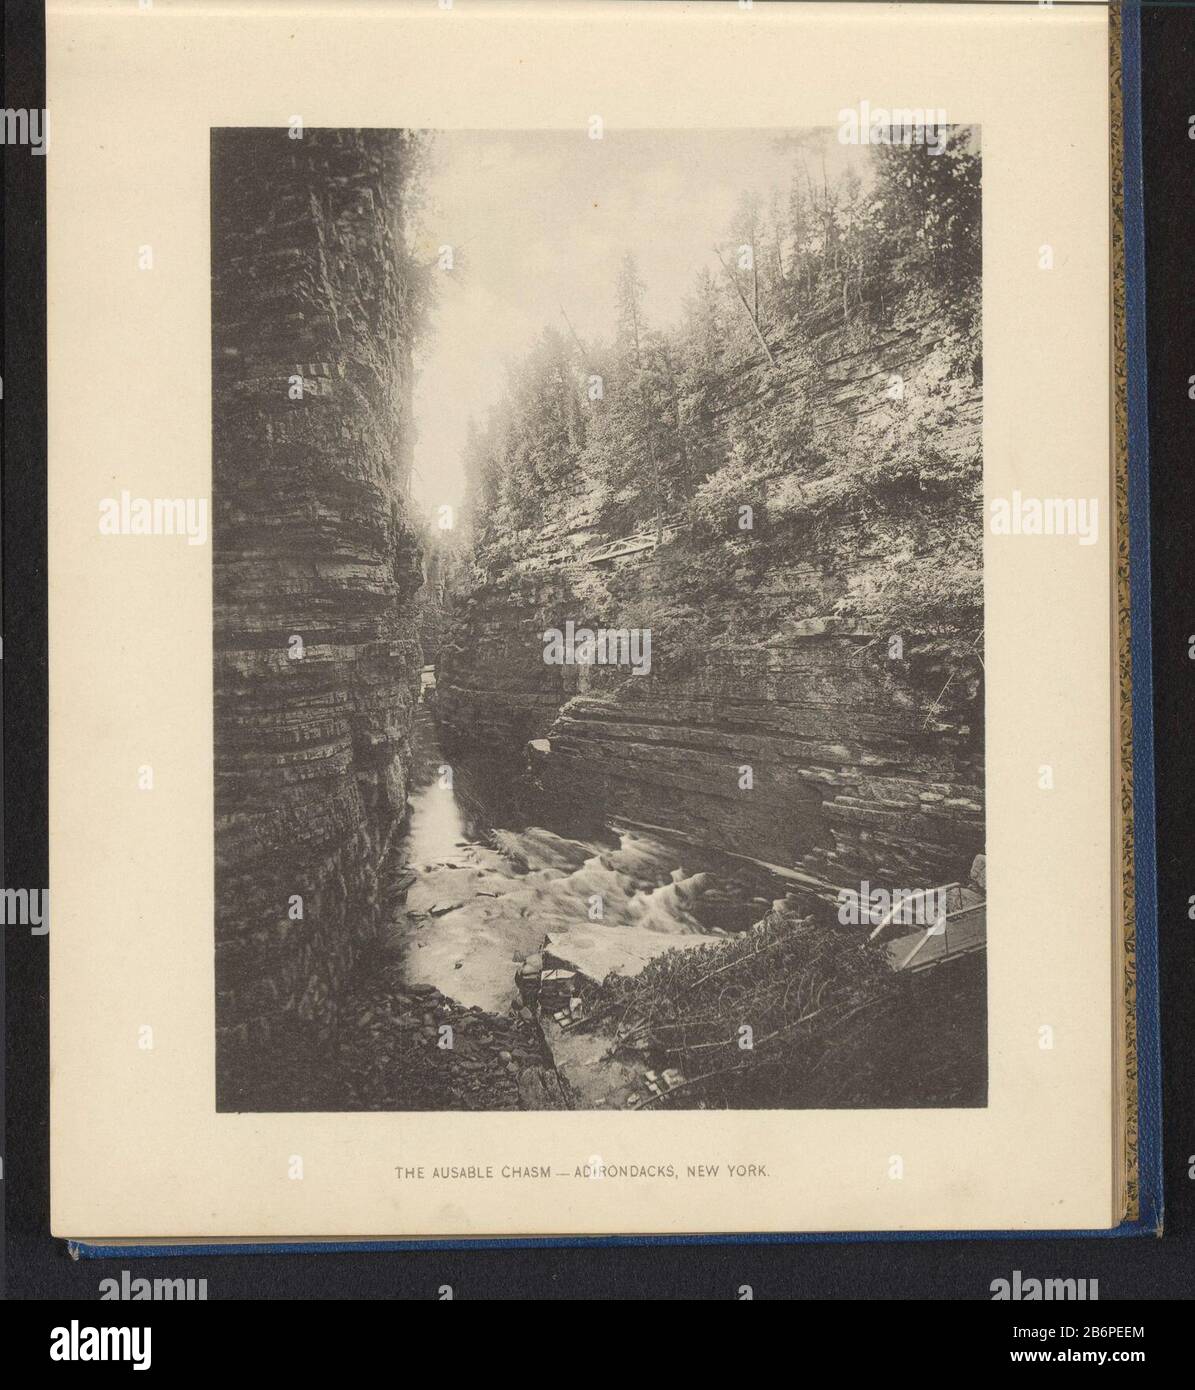 Gezicht op de Ausable Chasm in de Adirondack Mountains The Ausable Chasm - Adirondacks, New York (titel op object) View of the Ausable Chasm Ausable Chasm in the Adirondack MountainsThe - Adirondacks, New York (title object) Property Type: photomechanical print page Item number: RP-F 2001-7-996-14 Manufacturer : creator: anonymous place Manufacture: Adirondack Mountain Dating: ca. 1883 - or for 1893 Material: paper Technique: light pressure measurements: imprinted: h 185 mm × W 145 mm Subject: ravine, chasm, abyss, canyon river where: Adirondack Mountain Stock Photo